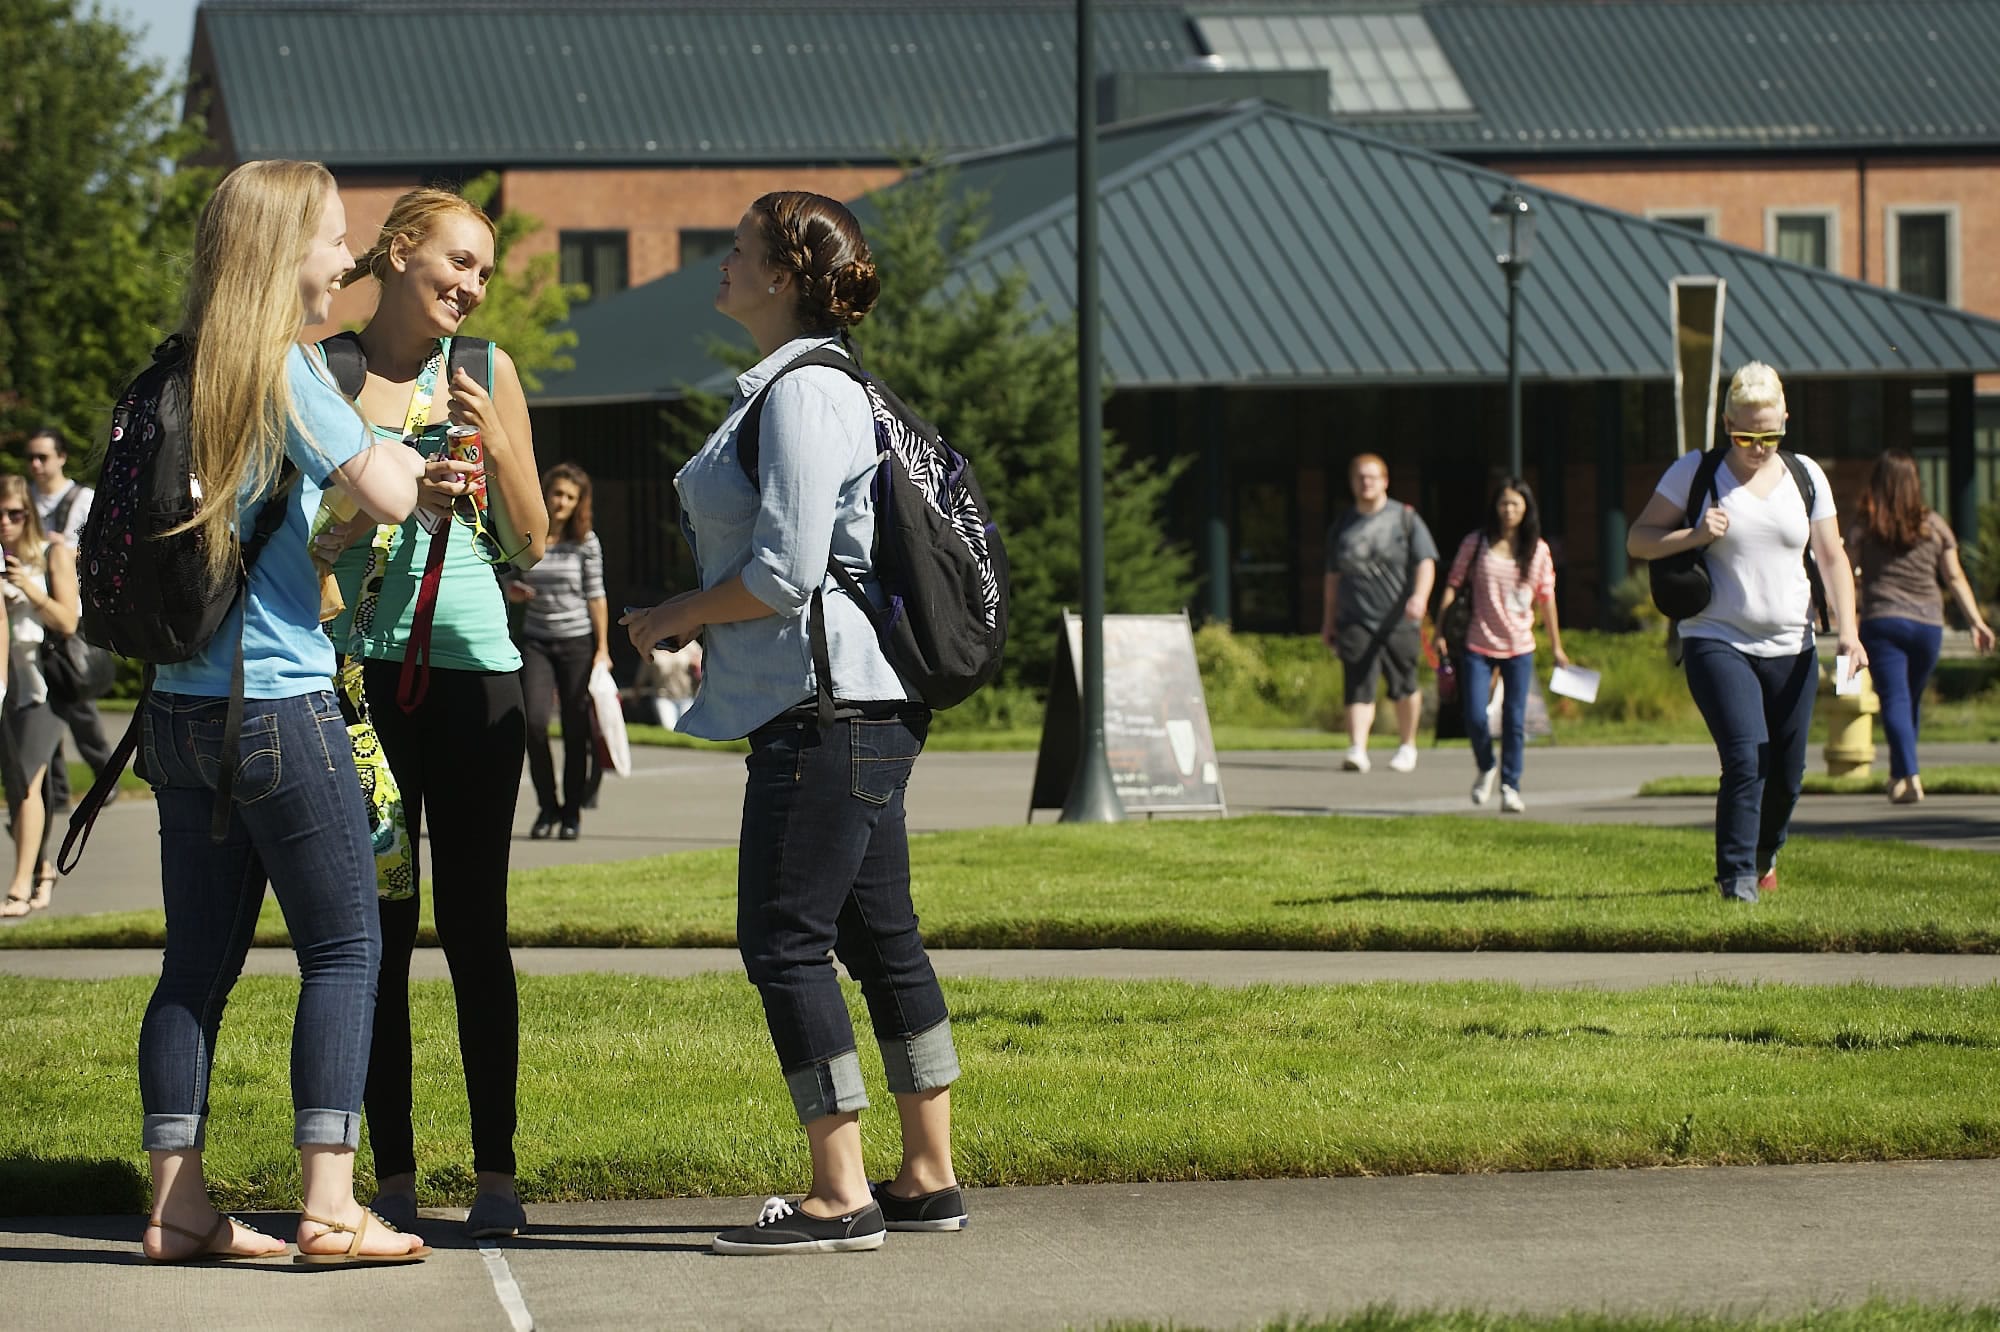 Students, from left, Emily Vis, 20, Miranda Bierscheid, 18, and Kaitlyn McClain, 20, visit during the first day of classes at Washington State University Vancouver on Monday.